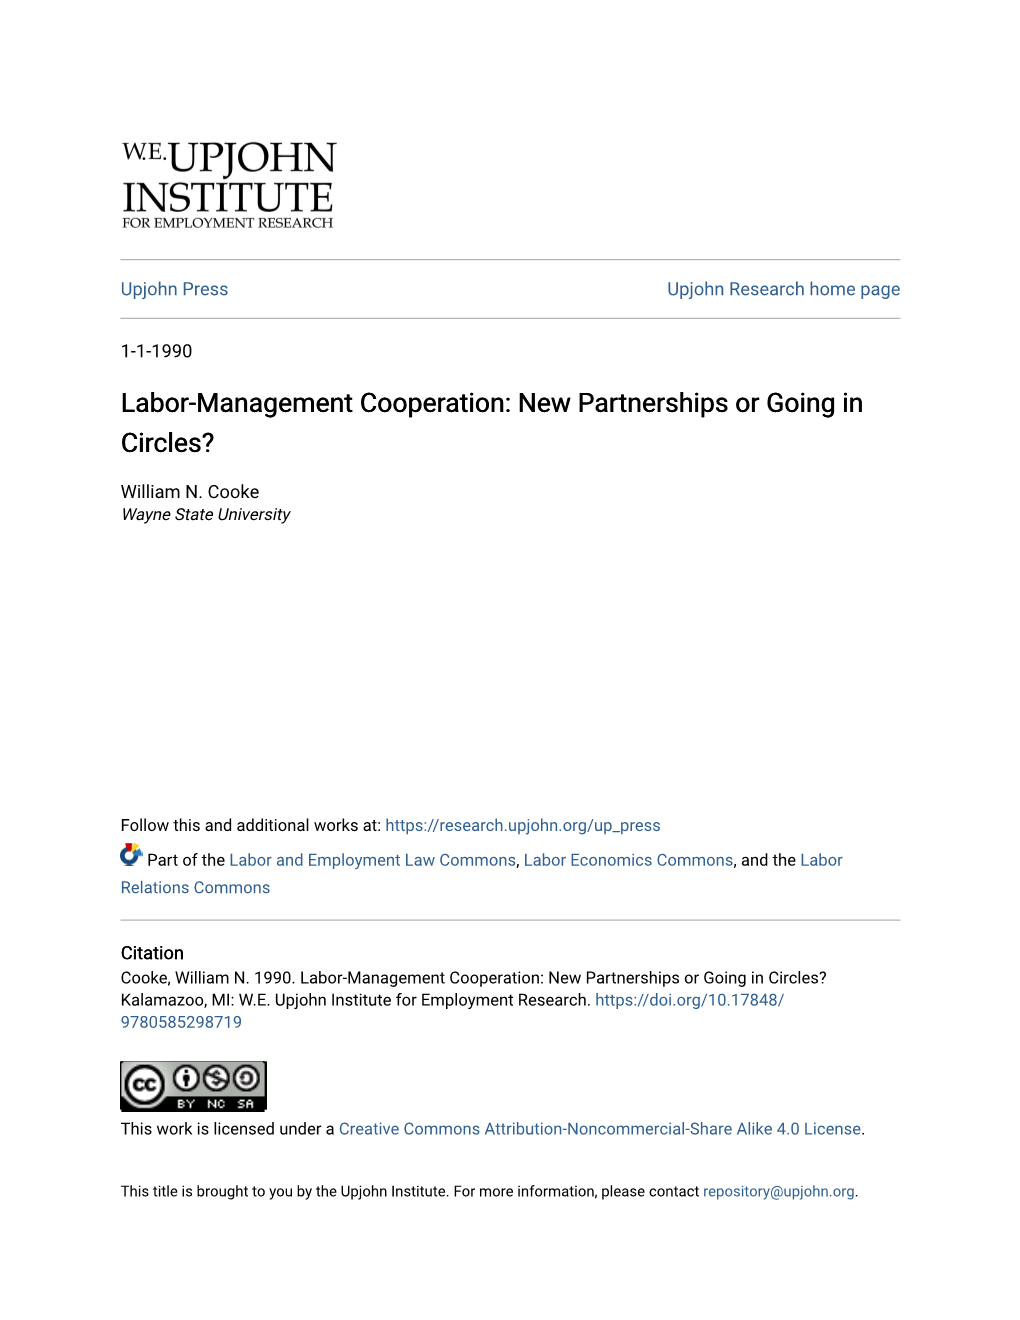 Labor-Management Cooperation: New Partnerships Or Going in Circles?